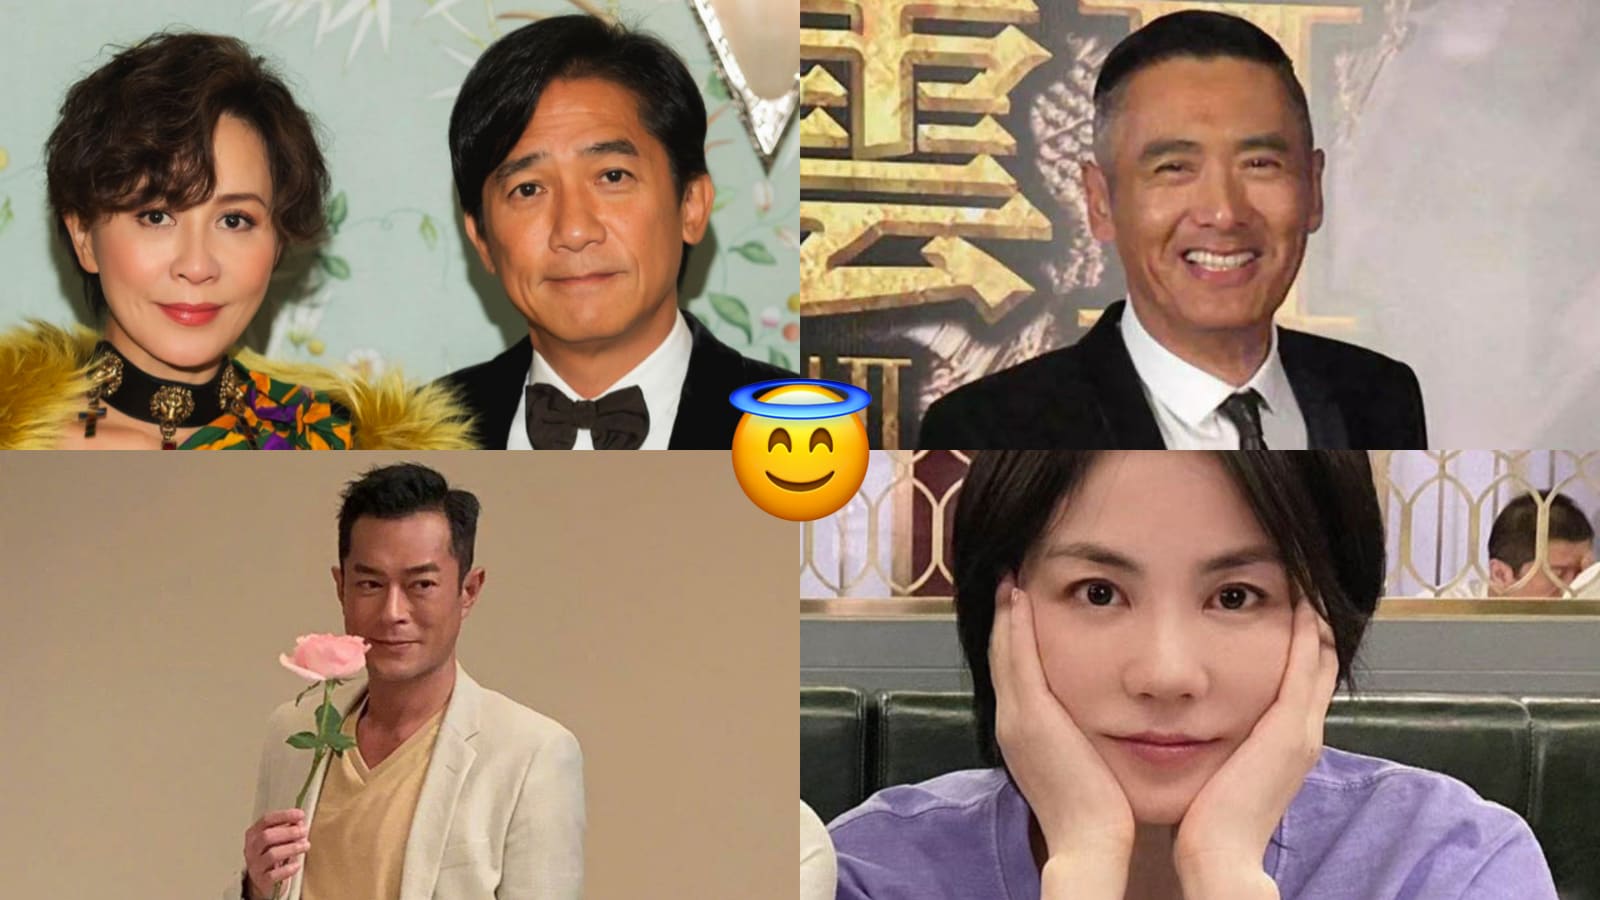 The Top 10 Nicest Hongkong Celeb Passengers According To A Former Cathay Pacific Air Stewardess